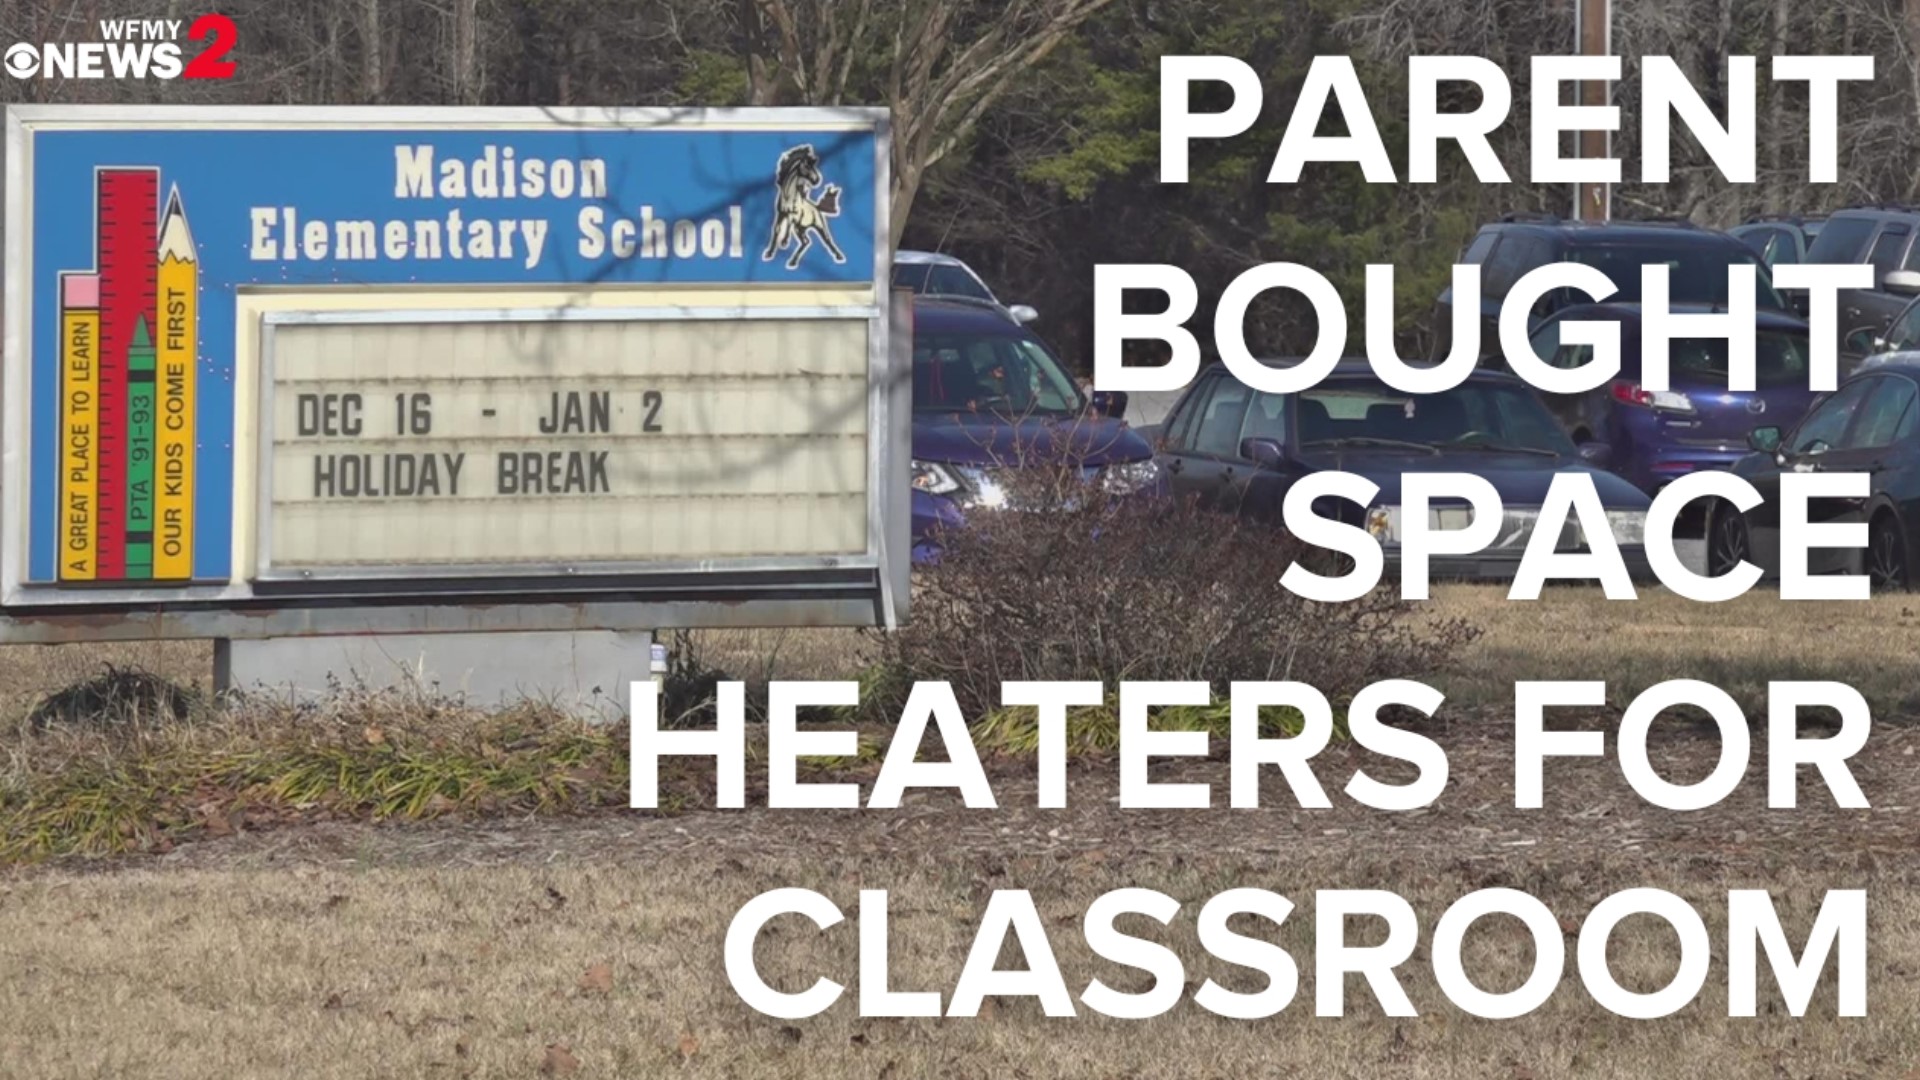 A Guilford County Schools parent bought space heaters for her son’s classroom after the heat went out.